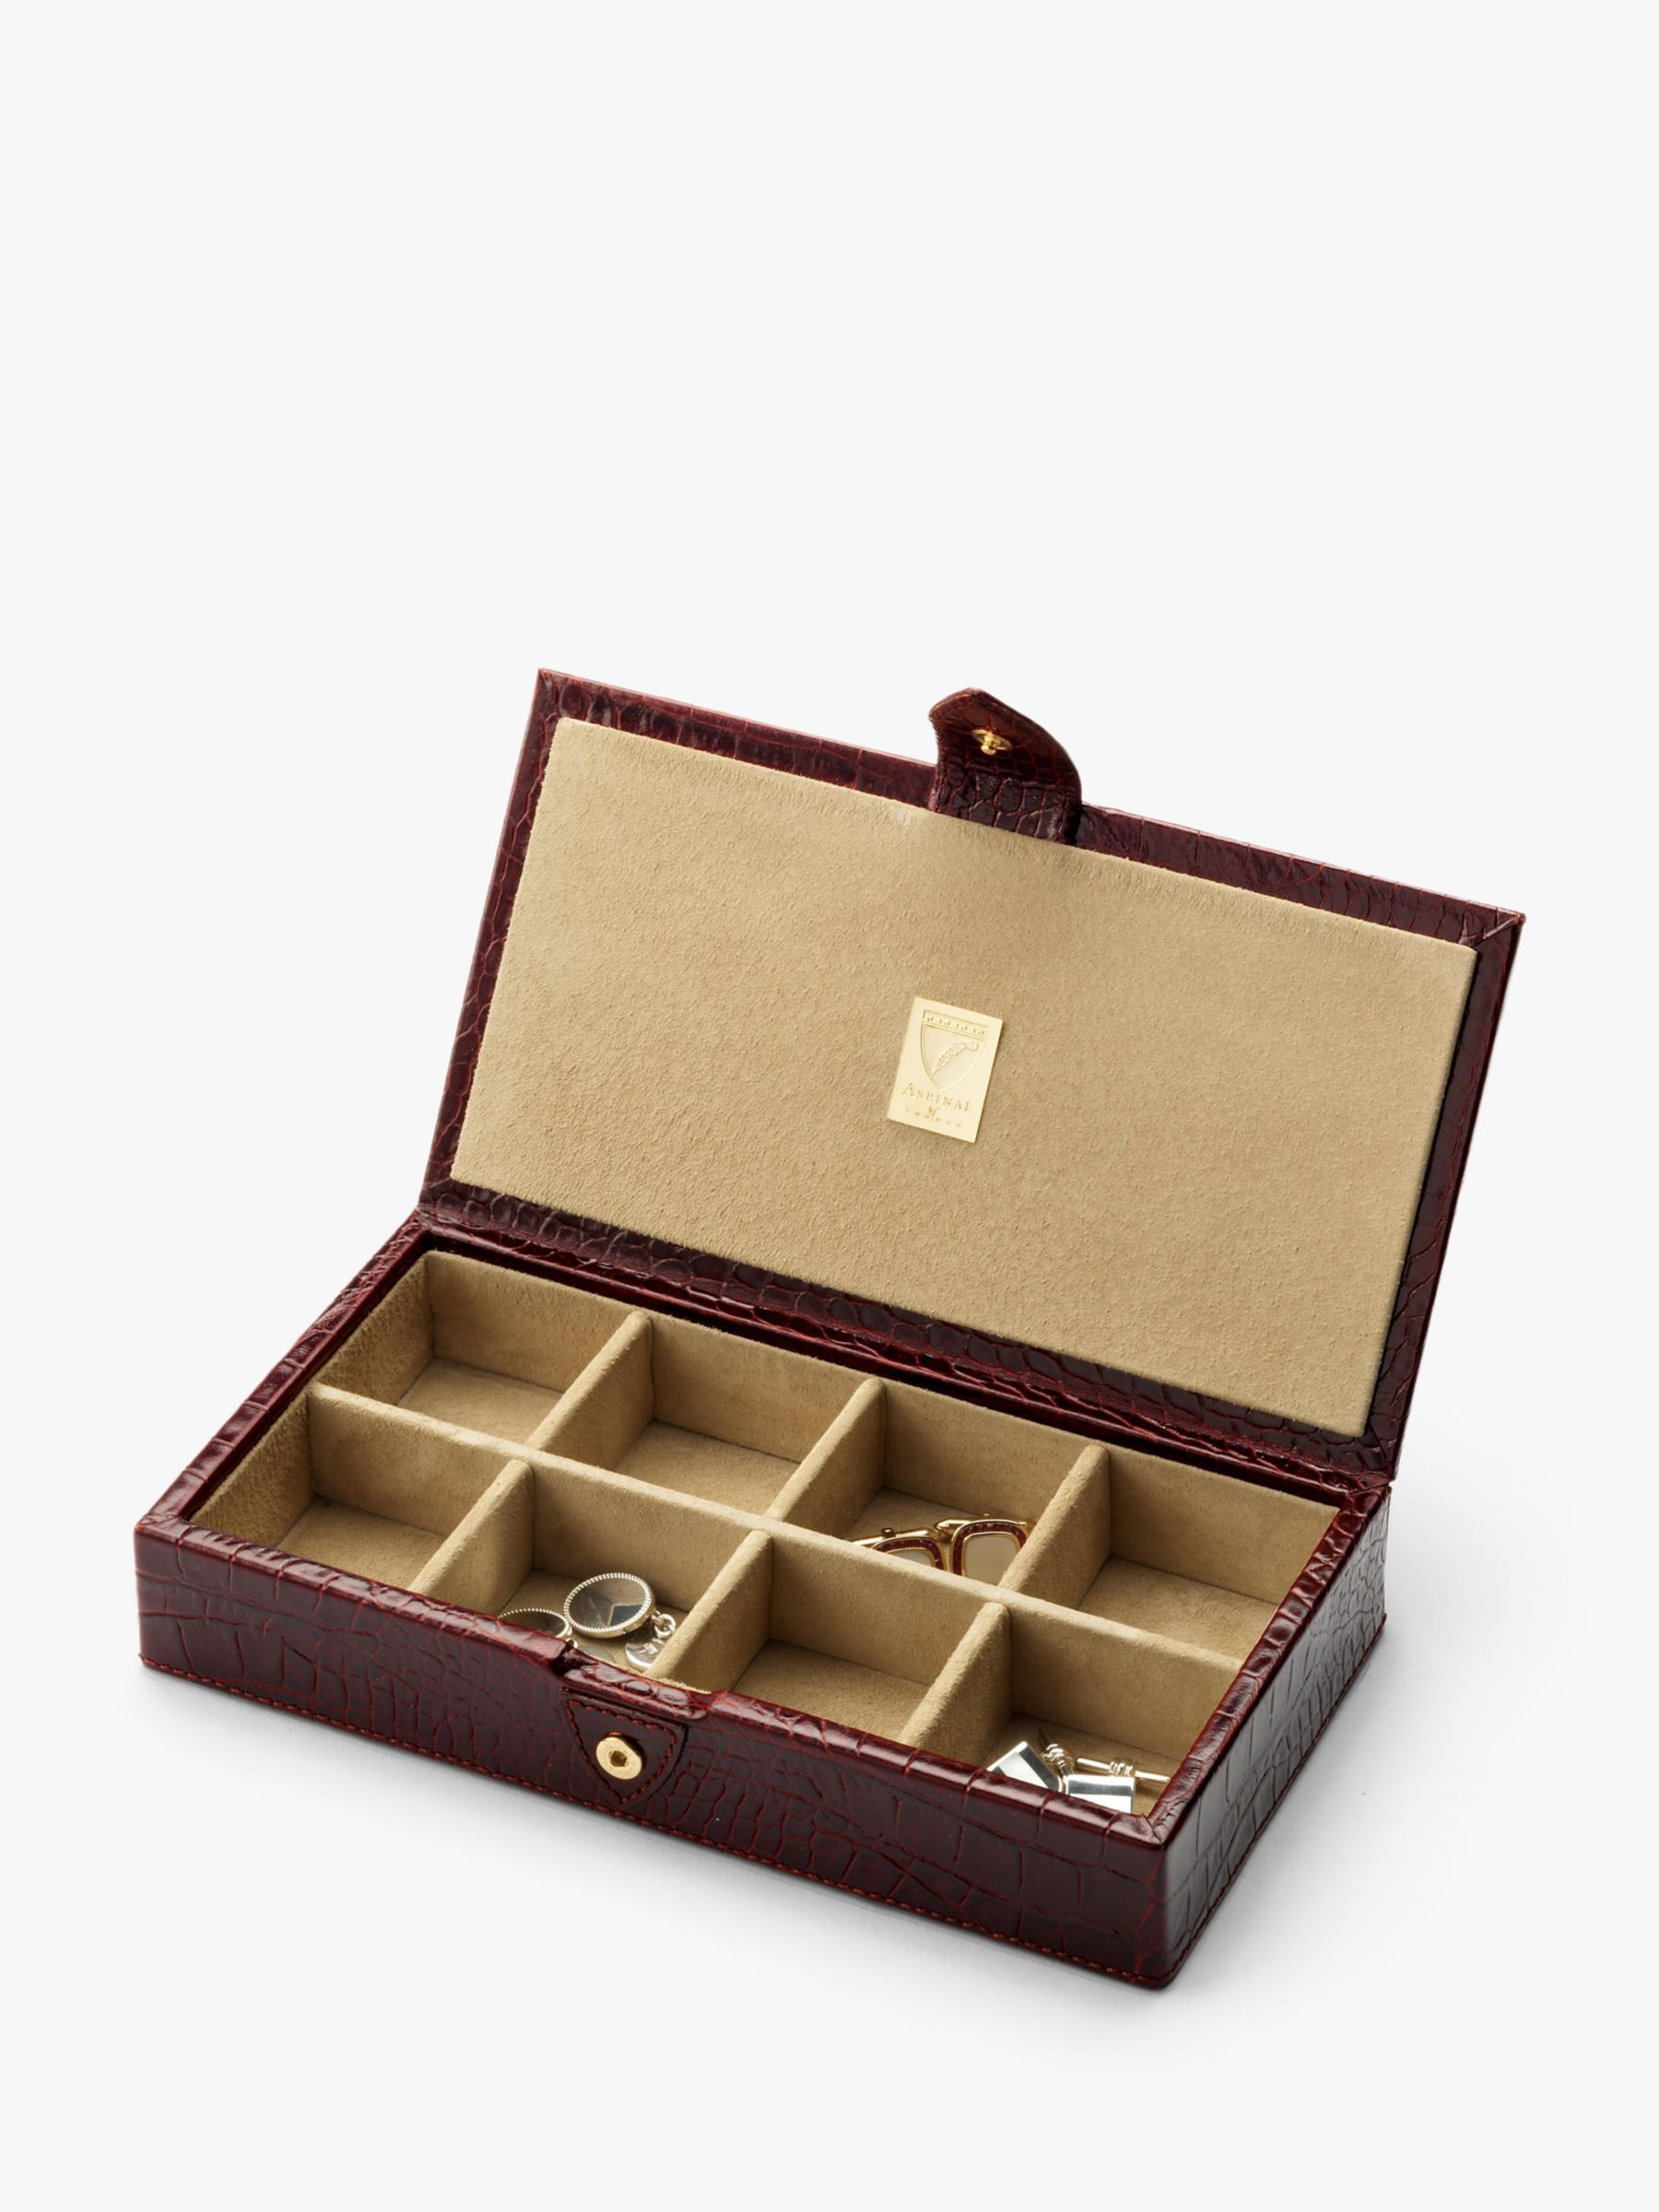 Buy Aspinal of London Croc Leather Cufflinks Box Online at johnlewis.com